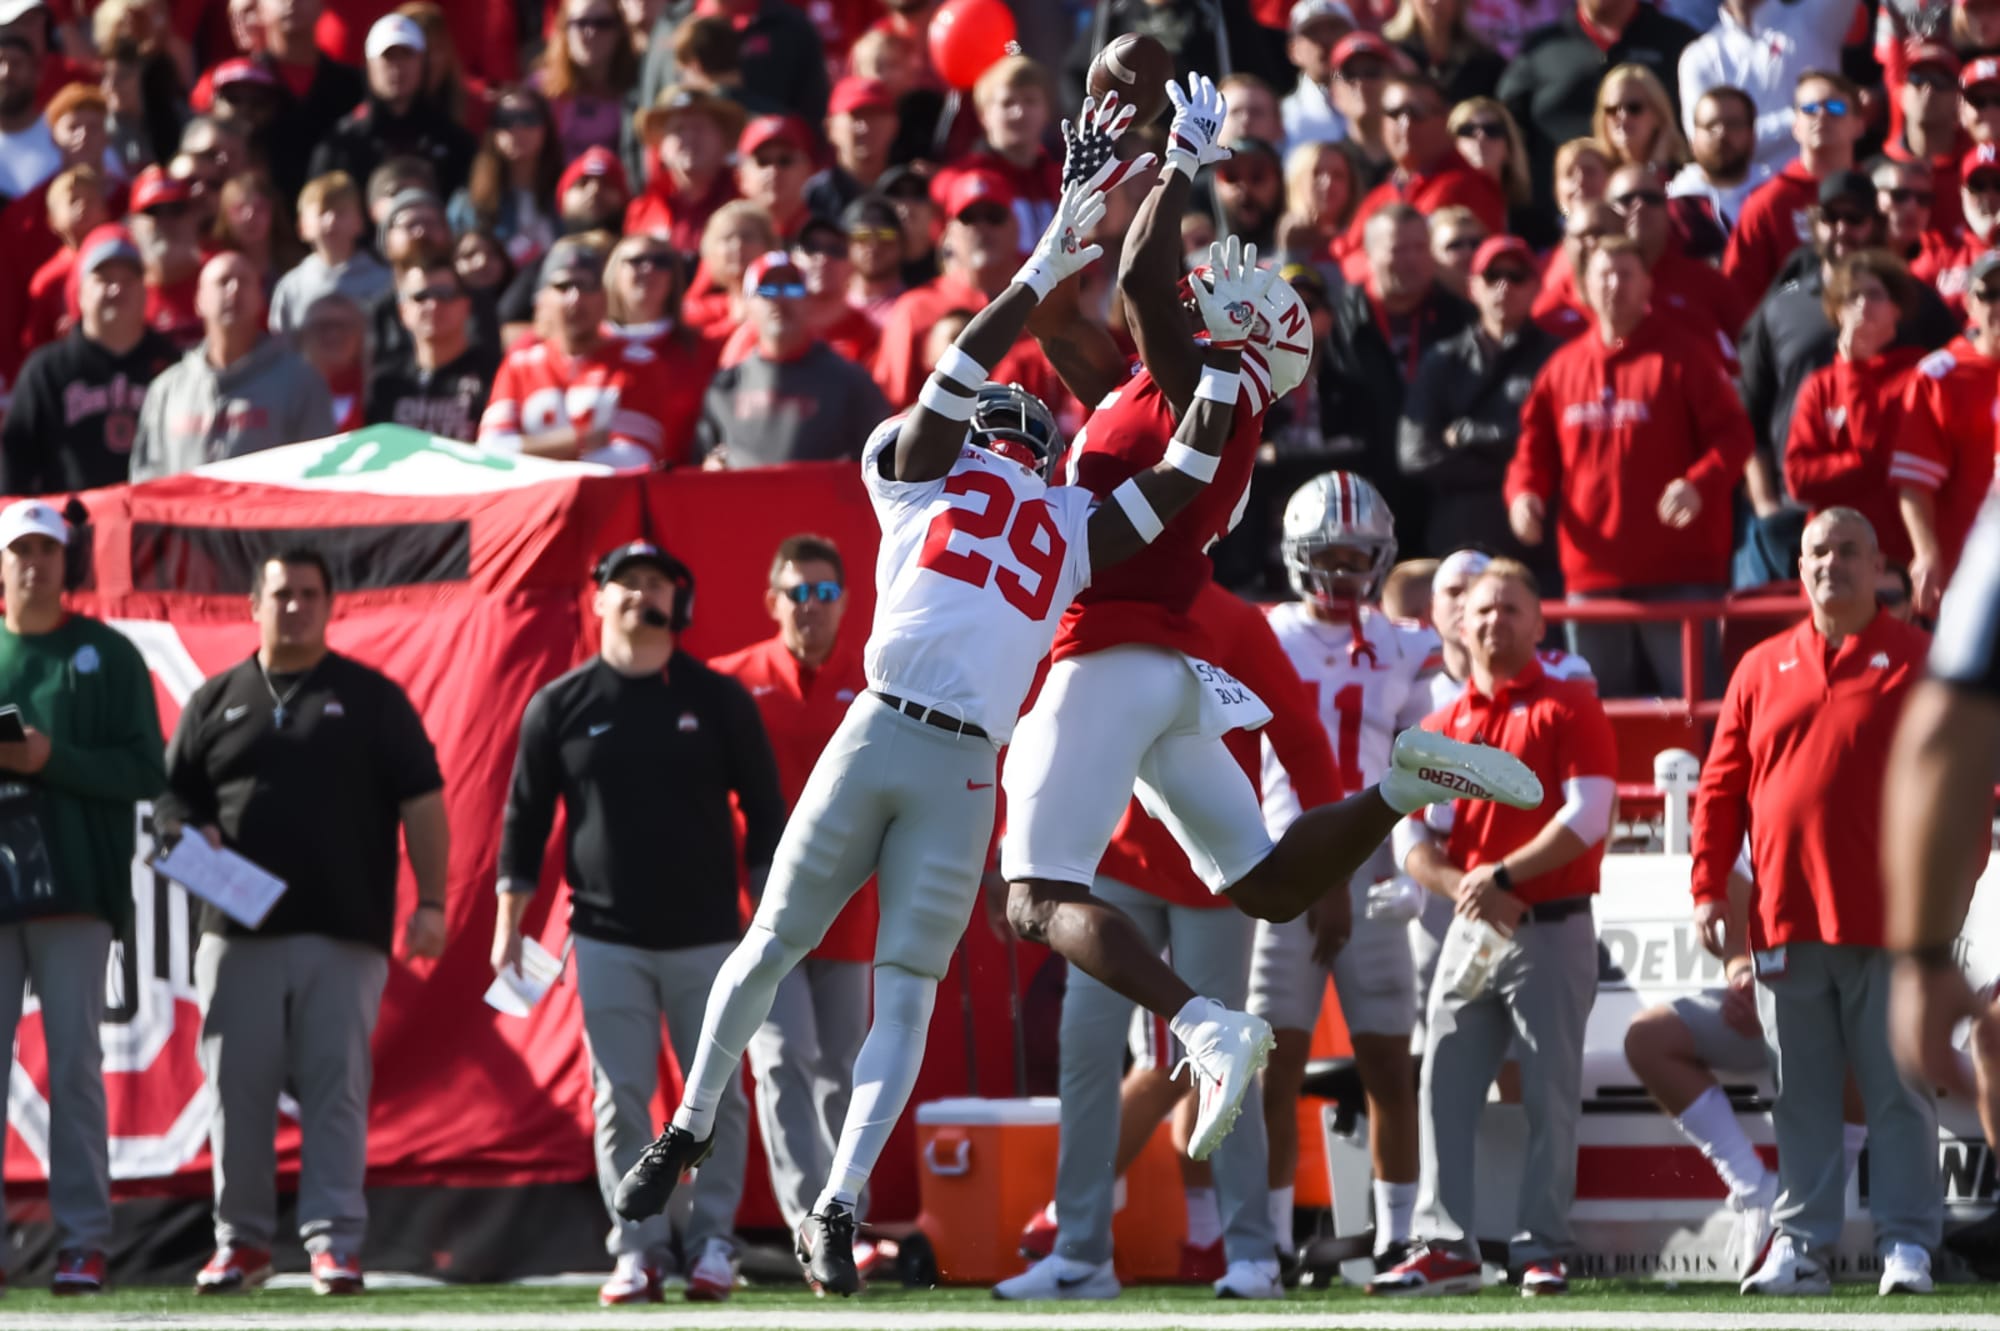 Ohio State football vs. Purdue has a mustsee matchup